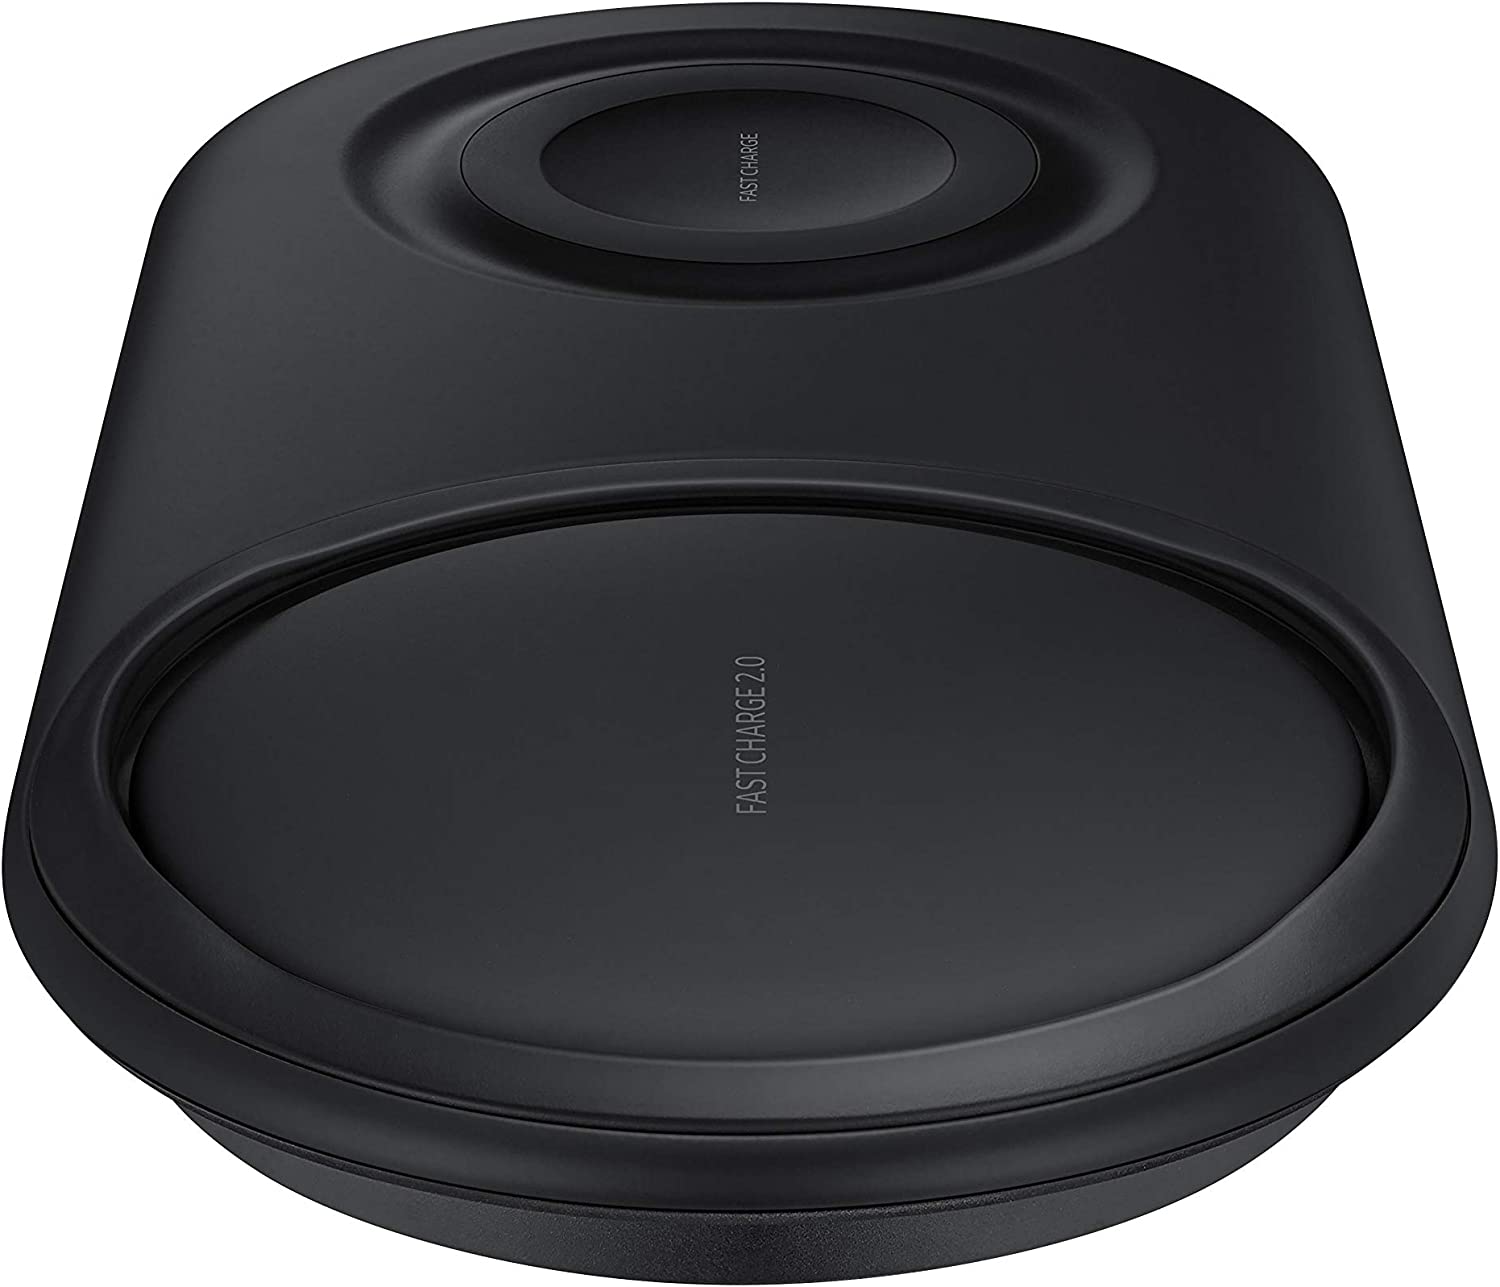 Samsung Wireless Charger Duo Pad In Black 5